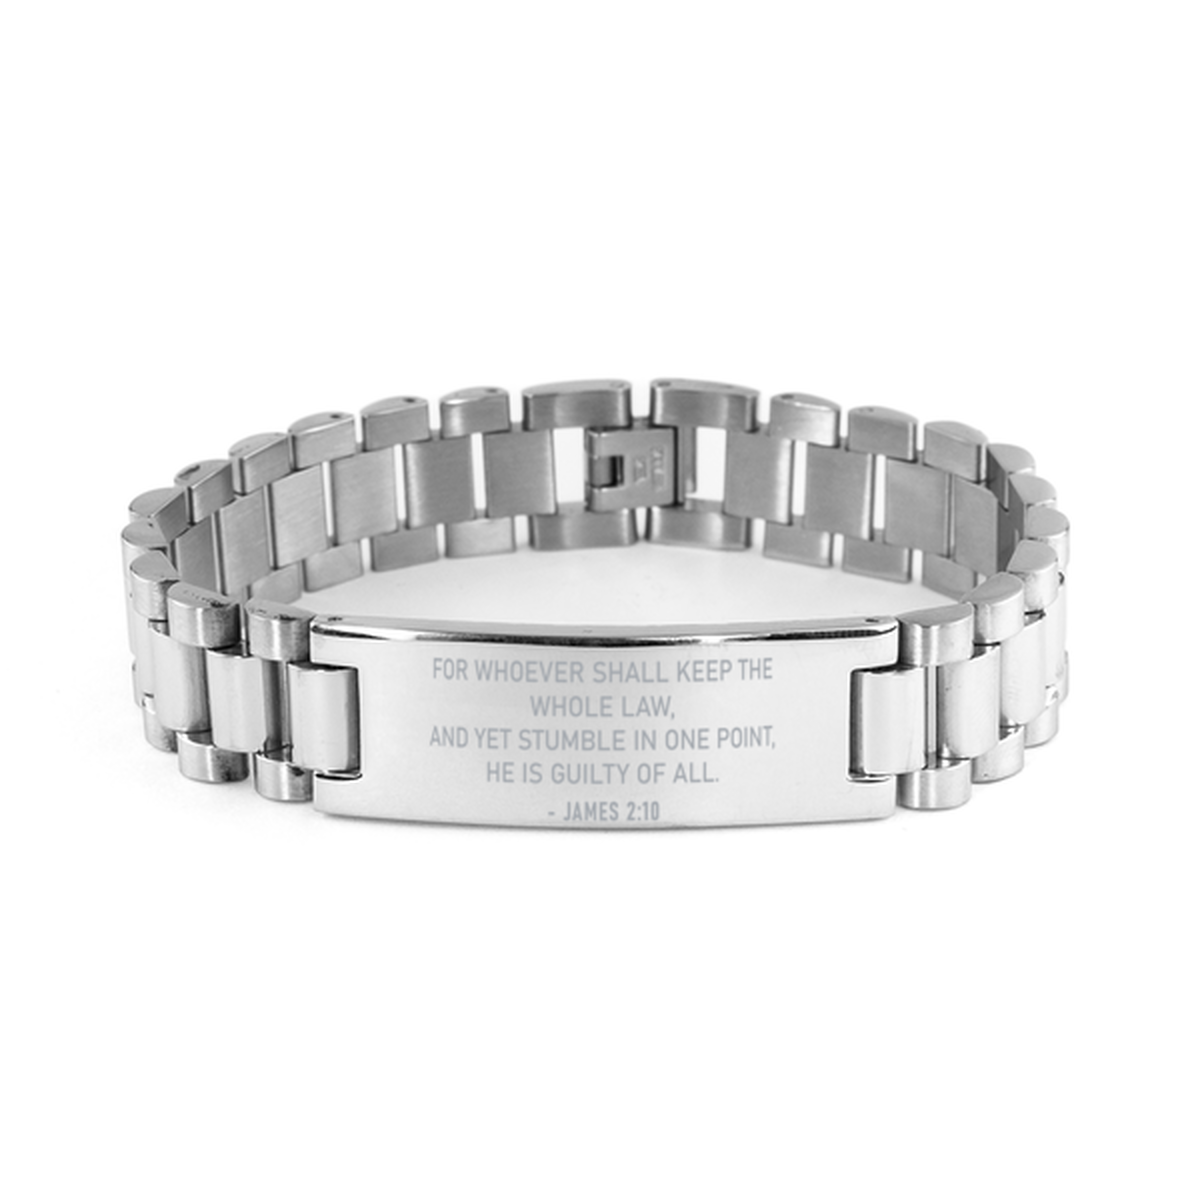 Christian Ladder Stainless Steel Bracelet, James 2:10 For Whoever Shall Keep The Whole Law, And Yet, Motivational Bible Verse Gifts For Men Women